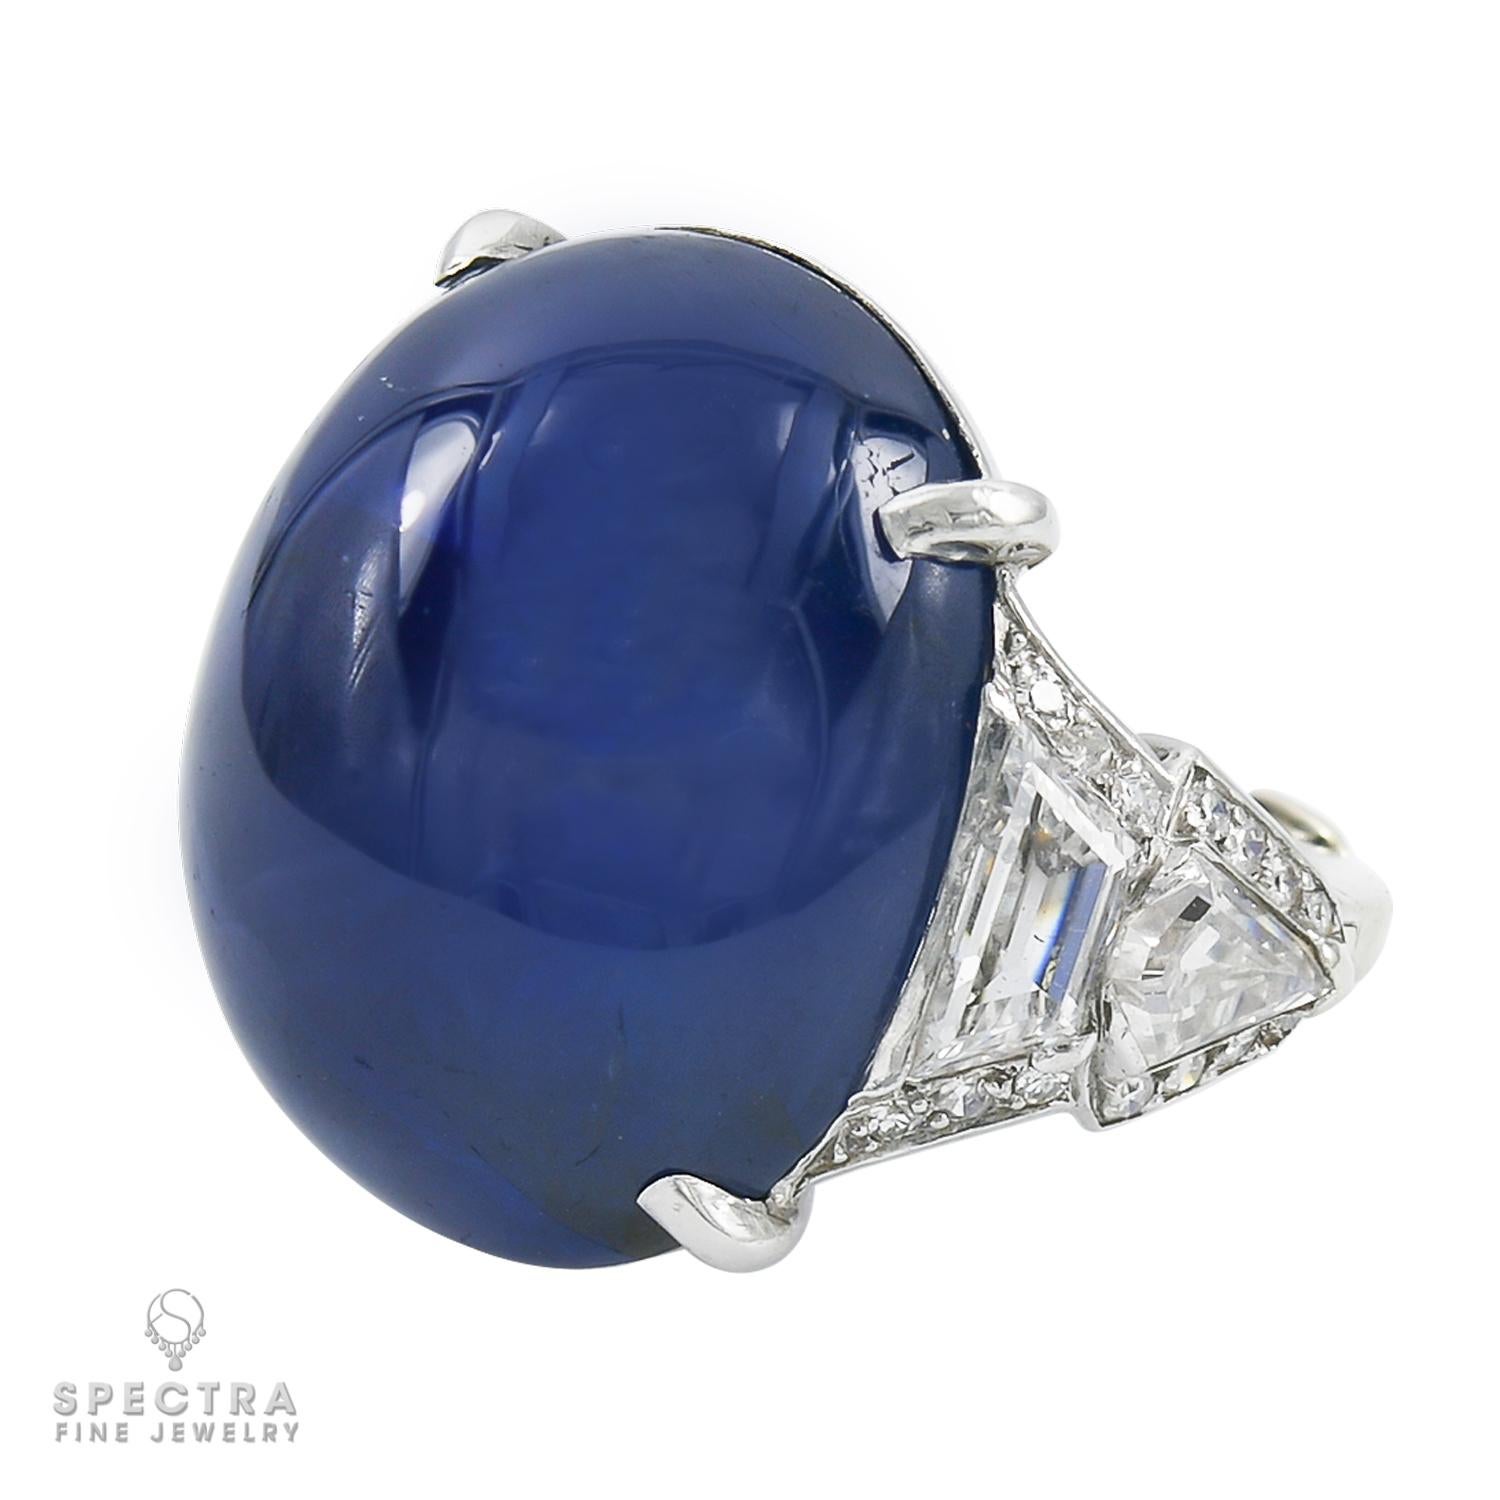 A cocktail ring representing an amazing oval cabochon blue sapphire of Burmese origin with no heat enhancement. Carat weight is 40.59.
Certified by AGL.
The center stone is accented with trapezoid and shield cut diamonds on both sides, approximately